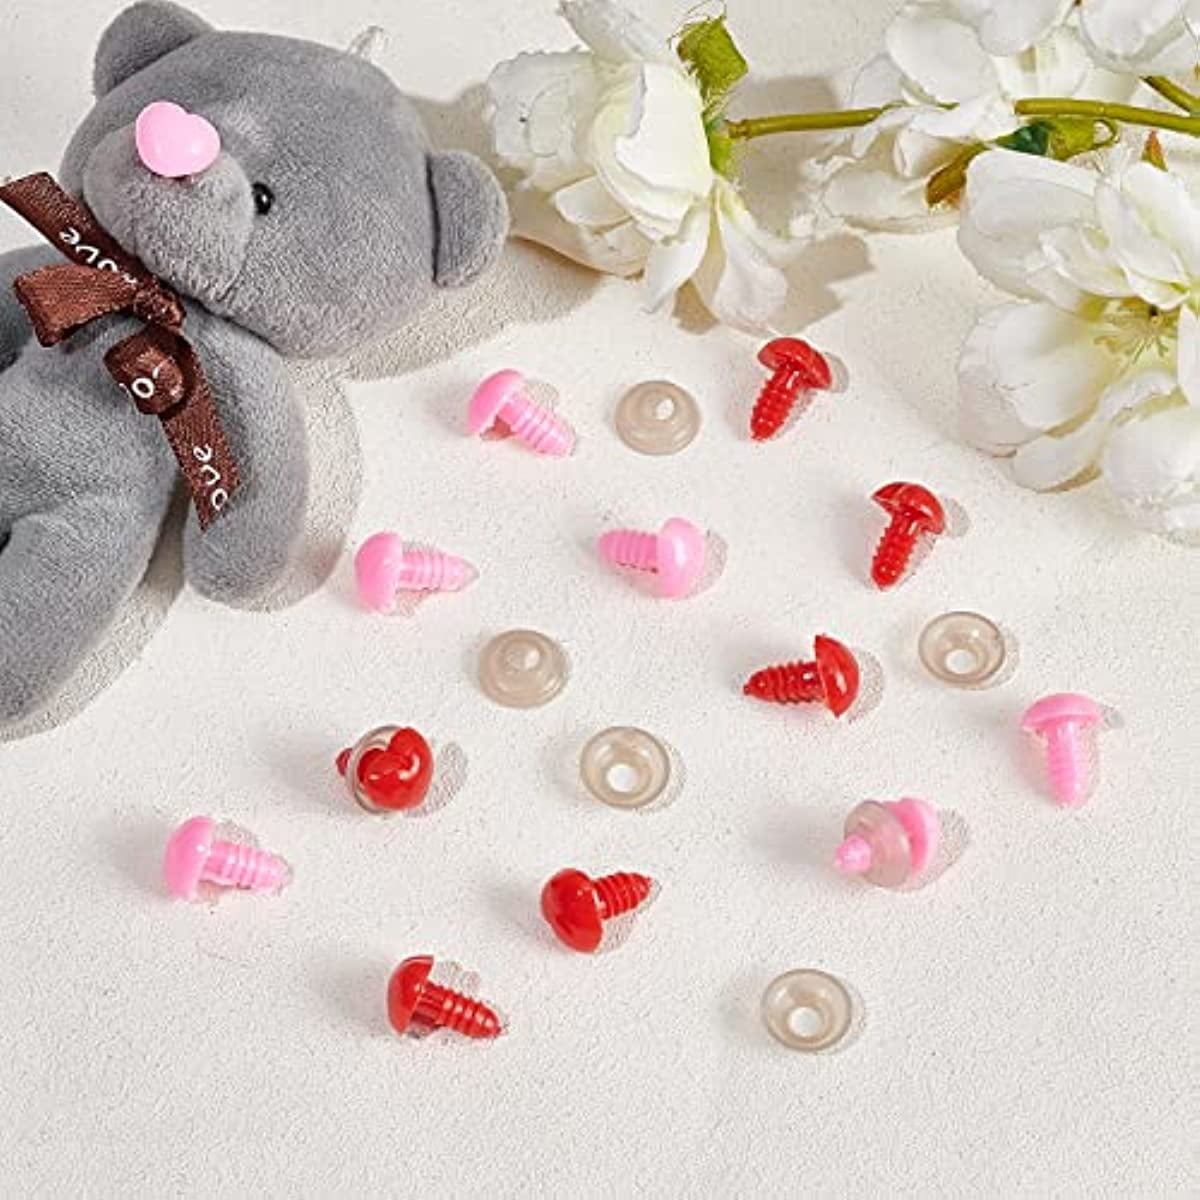 Heart Safety Nose Button Eyes Gift Assortment